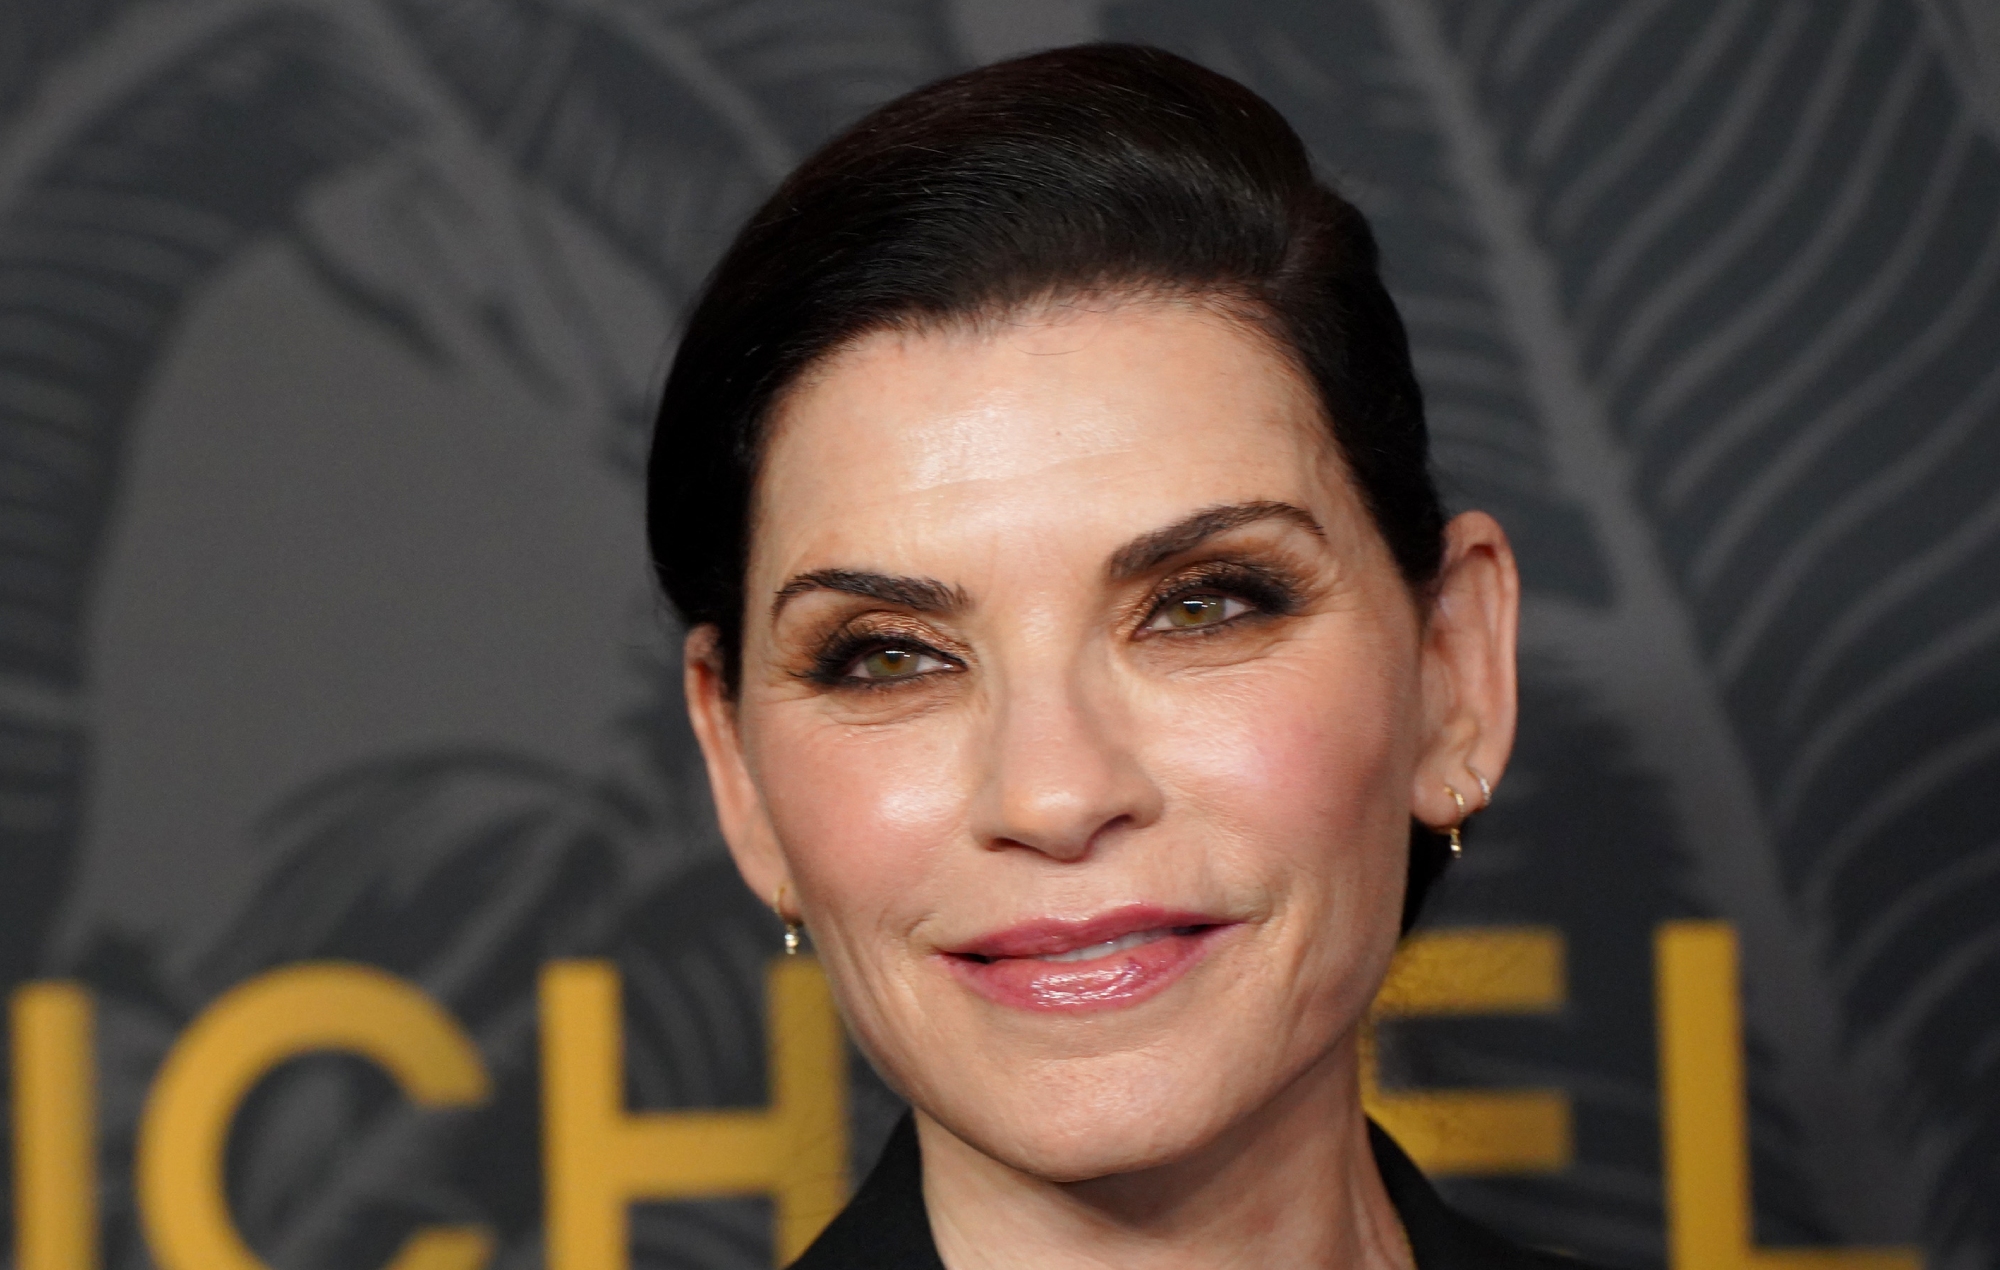 Julianna Margulies issues apology for offending Black and queer communities